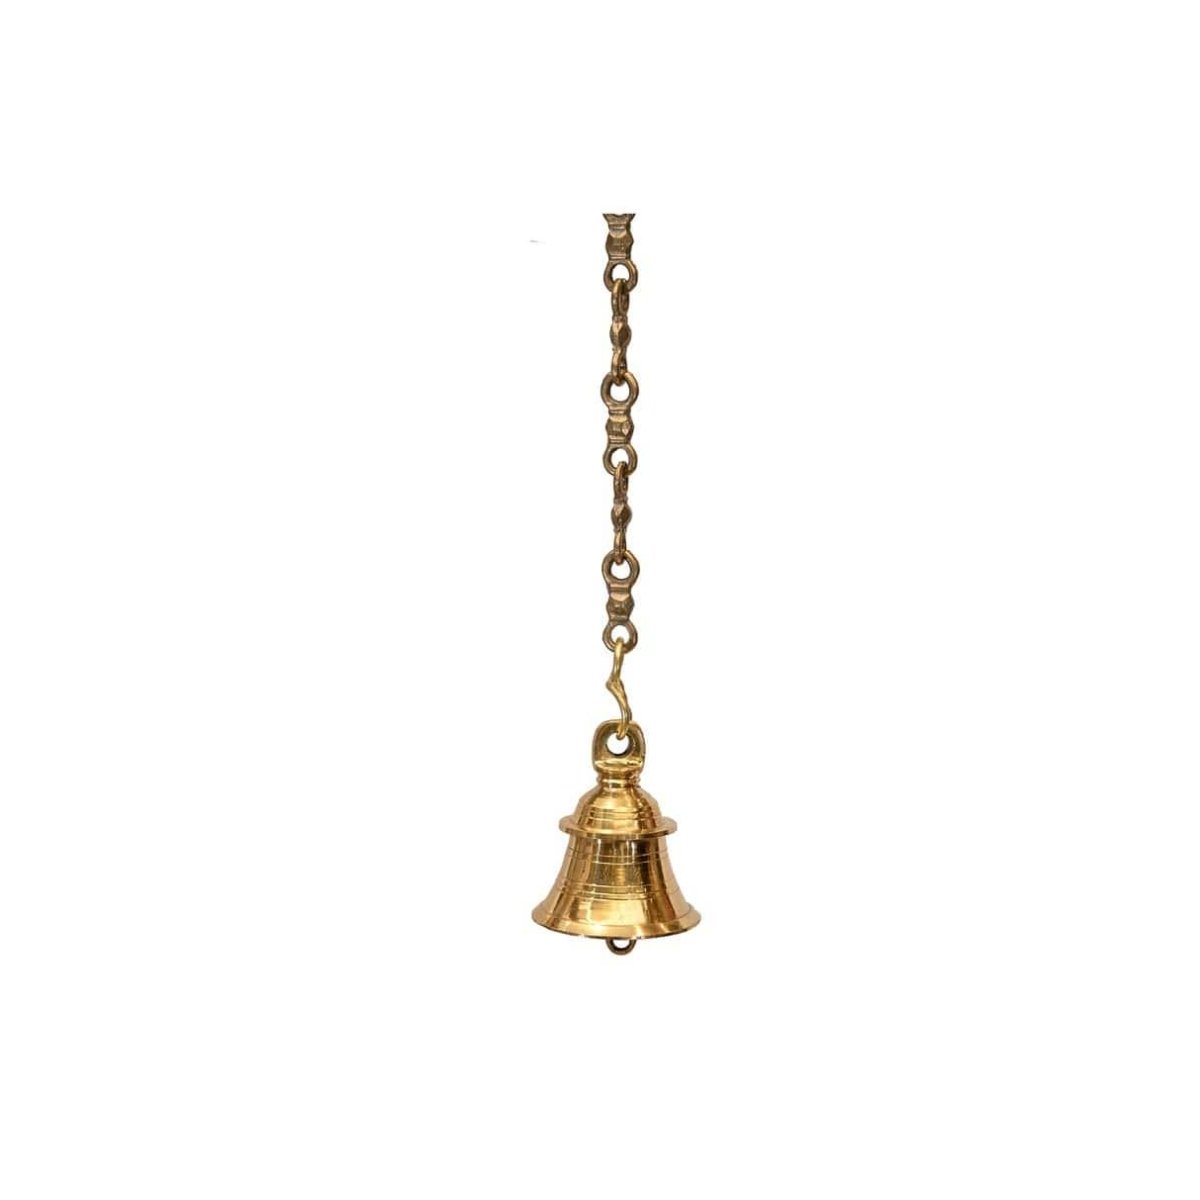 Brass Happiness bell (Rope length 22 Inches, Weight 0.6 Kg, Dia 2.70 Inches)